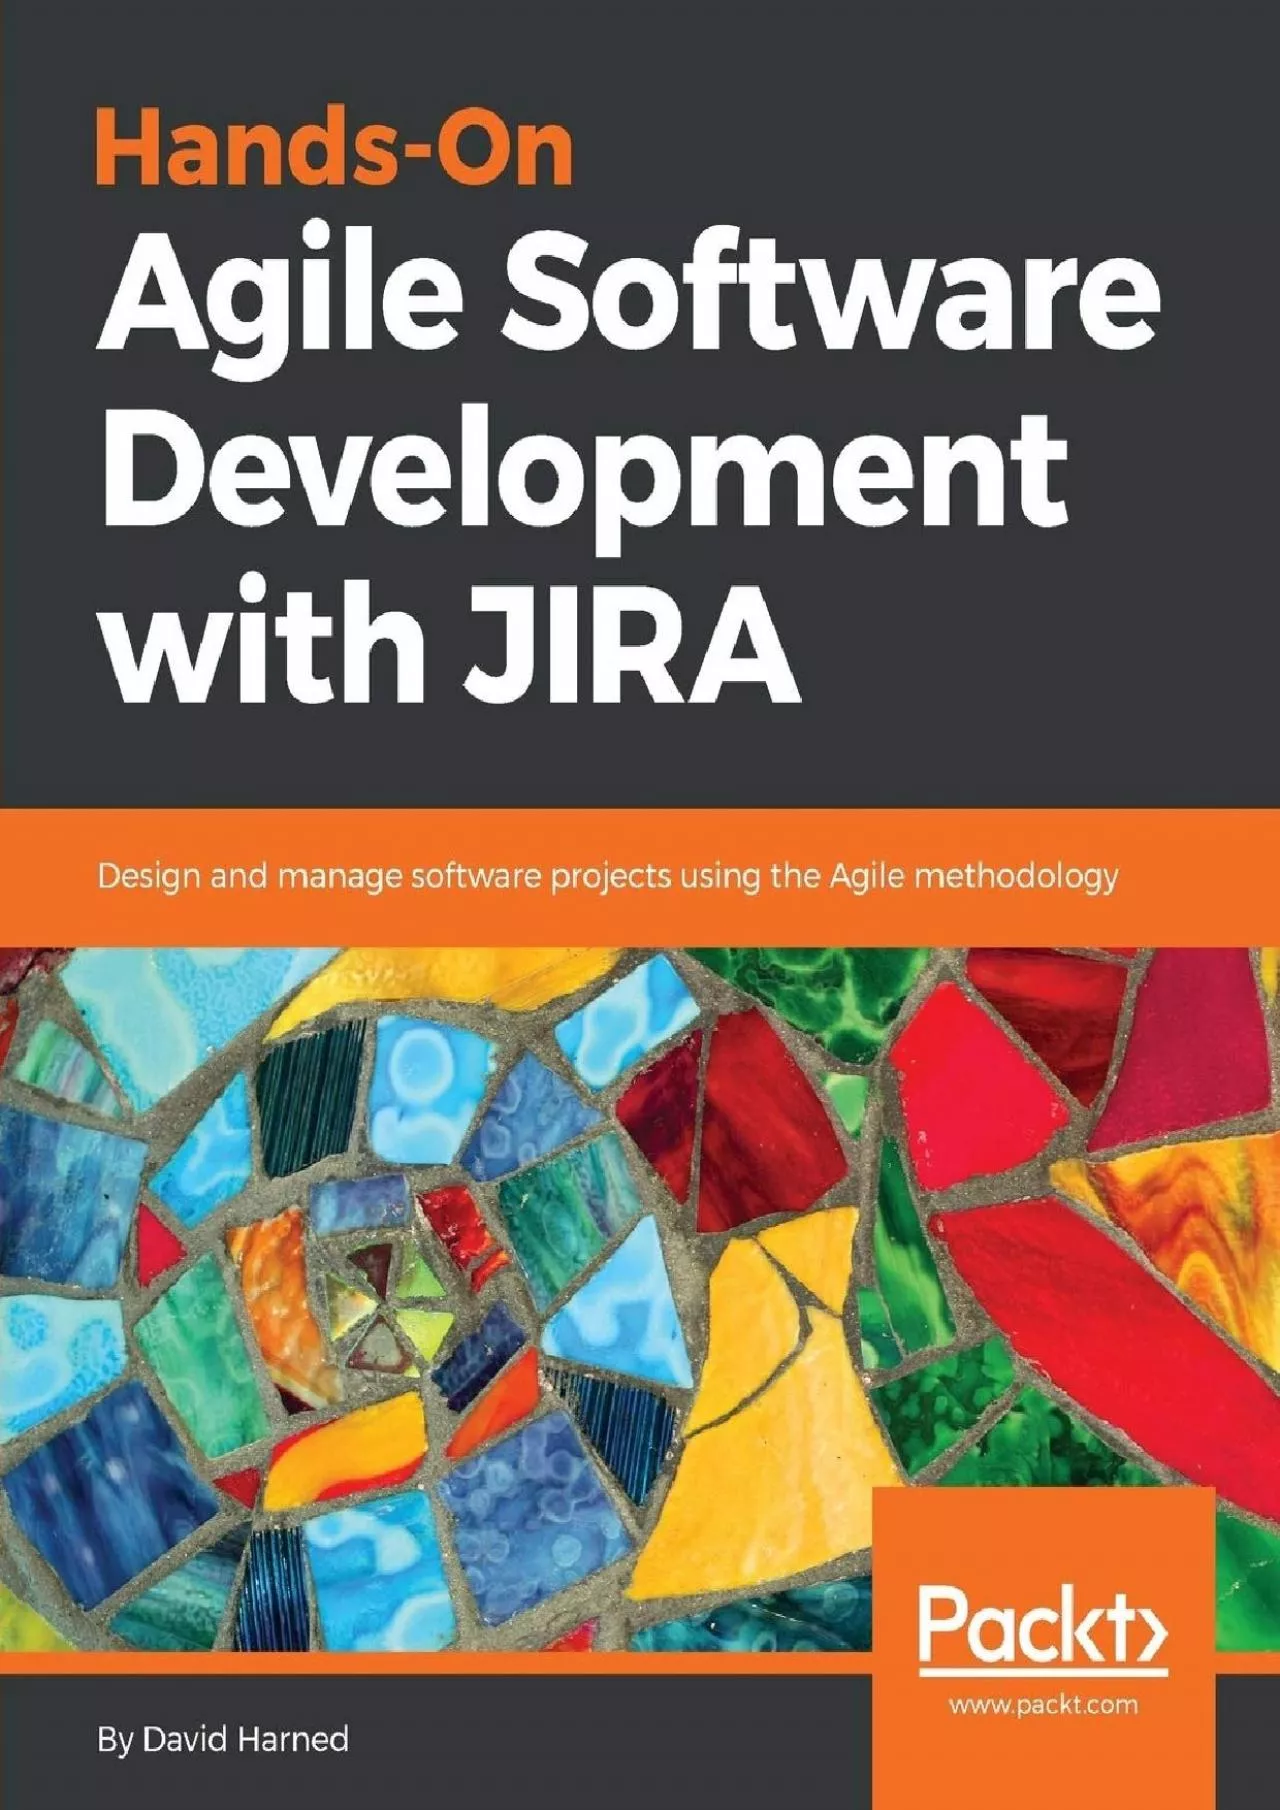 Hands-On Agile Software Development with JIRA: Design and manage software projects using